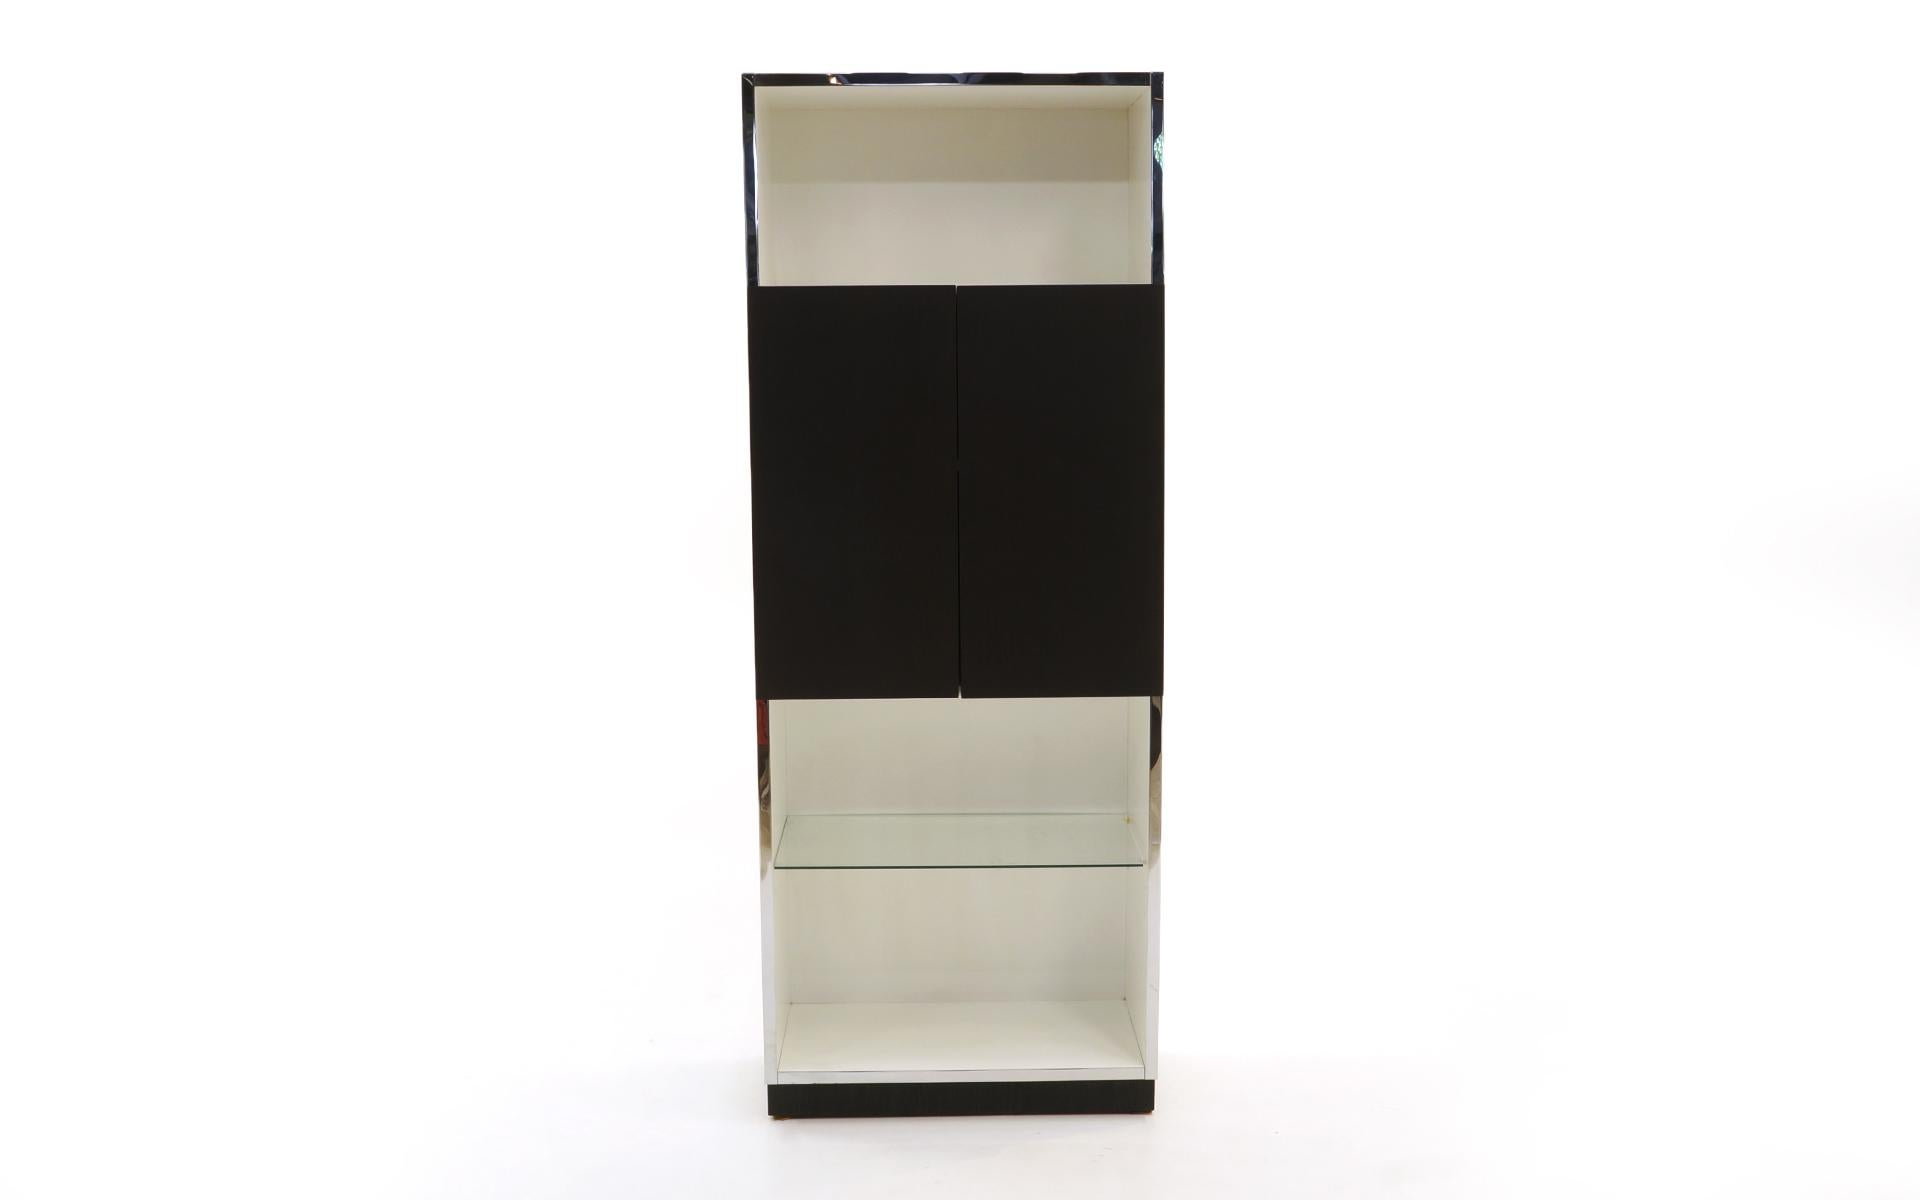 Milo Baughman tall cabinet. All the shelves are adjustable so can be used for many types of storage or display. It has been used as a bar cabinet. The white lacquered surfaces are in very good to excellent condition as is the chrome, glass, and